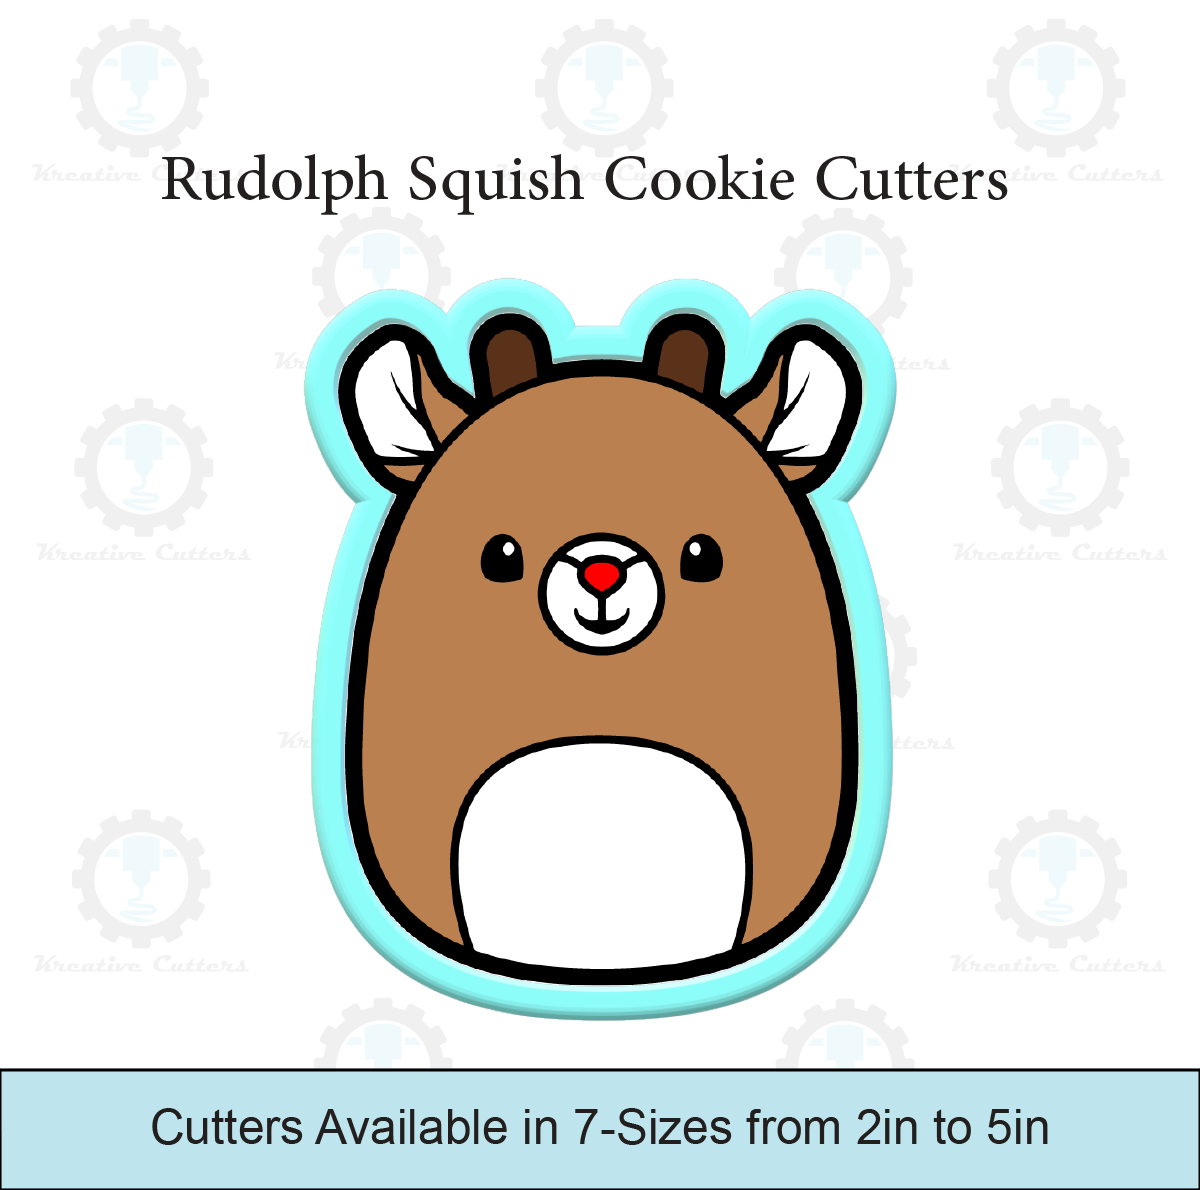 Rudolph Squish Cookie Cutters